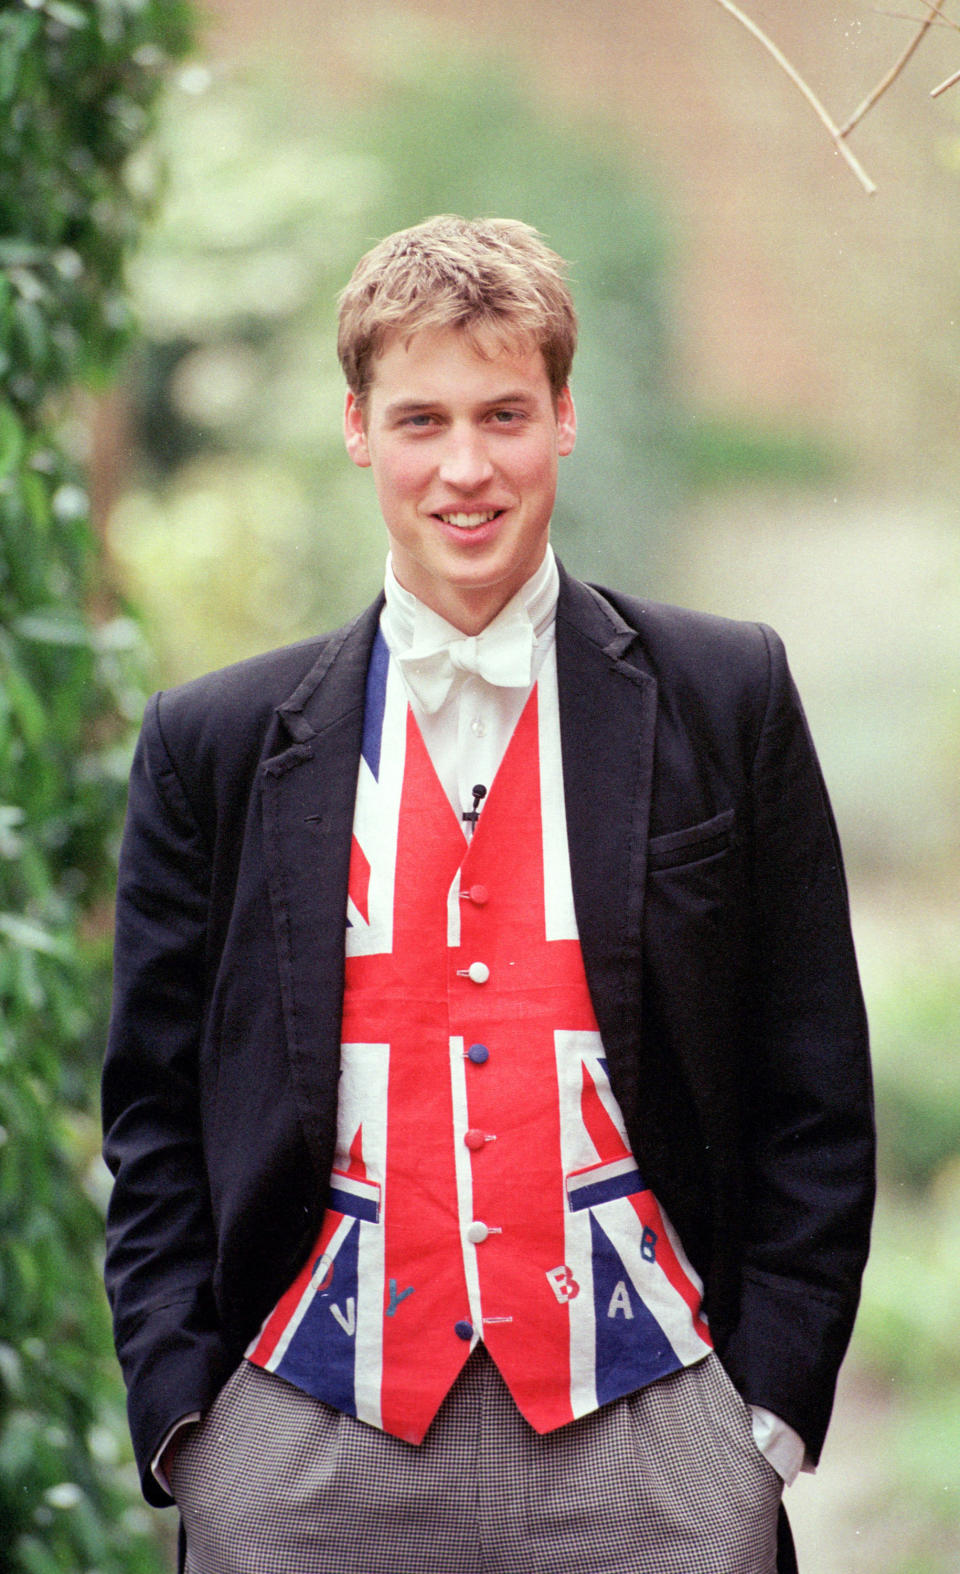 Prince William dressed as a prefect, with a union jack waistcoat at Eton in June 2000. at the Various in LONDON, United Kingdom. (Photo by Anwar Hussein/WireImage)